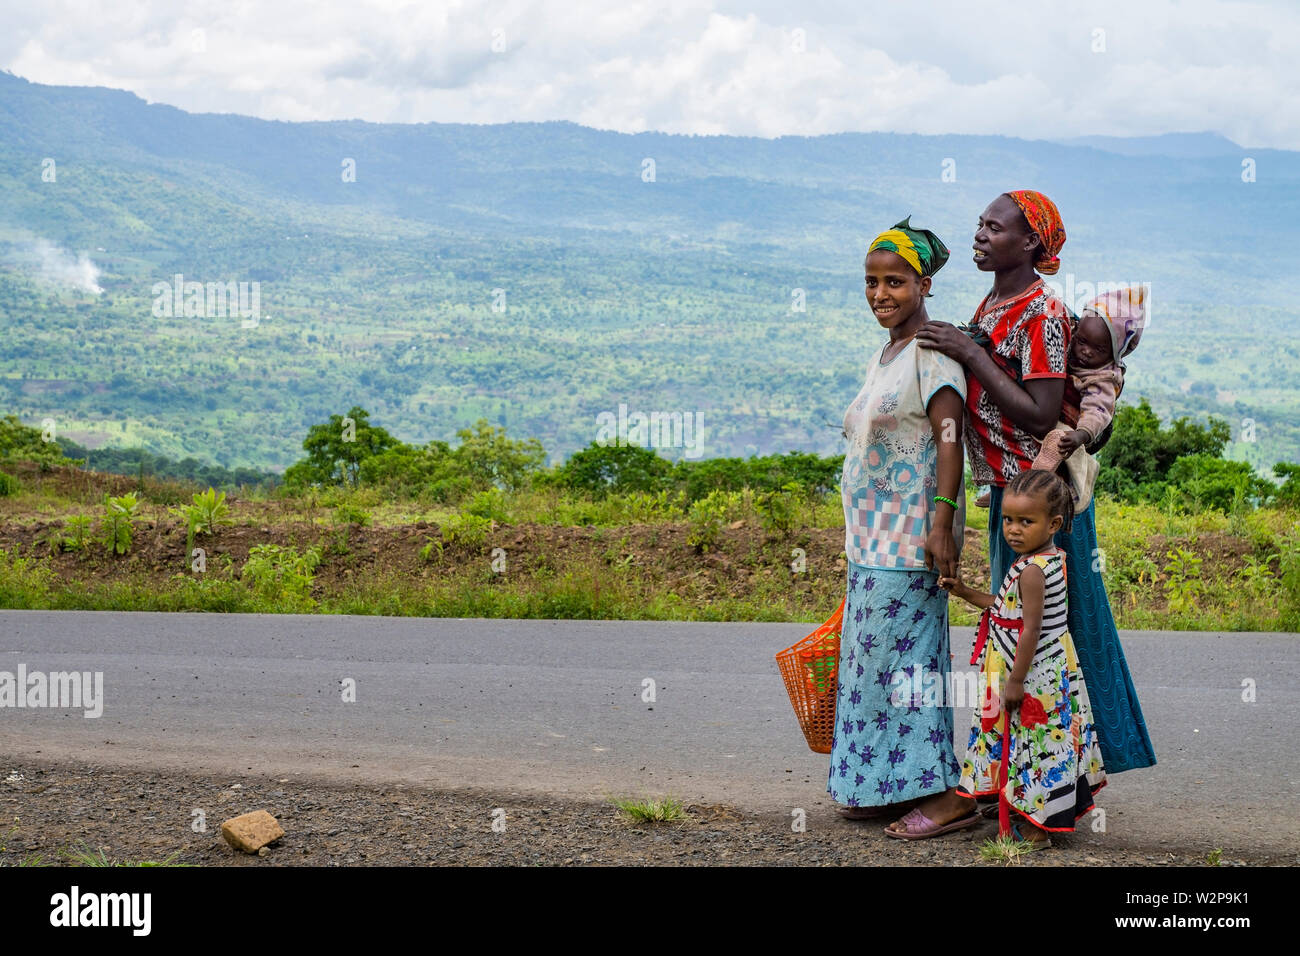 Two young women carrying a small child on the road to a market near Mizan Teferi, Bench Maji, Ethiopia Stock Photo